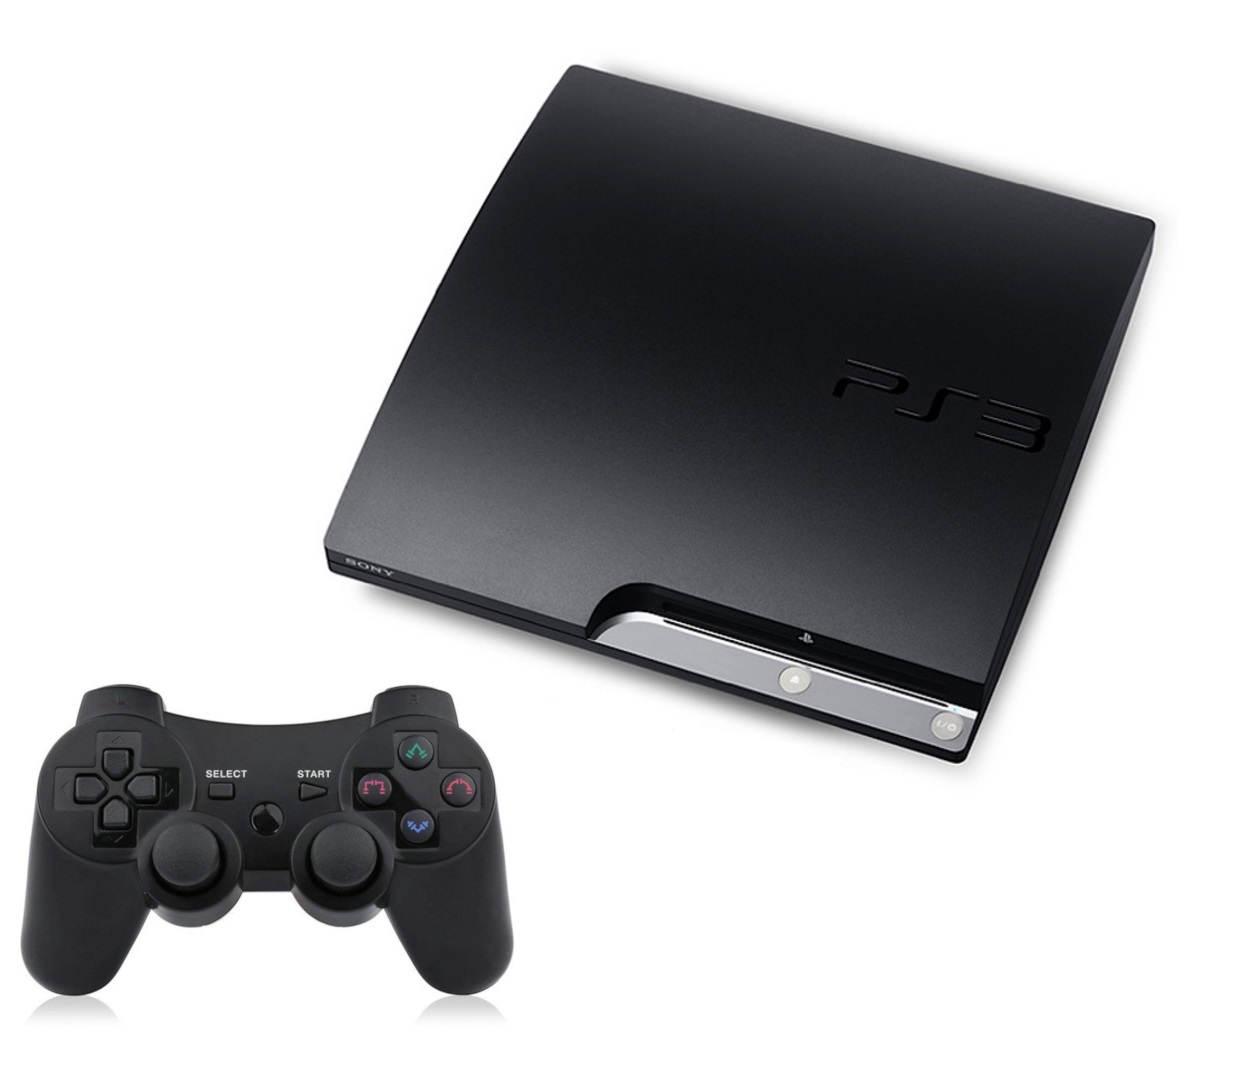 Playstation 3 ps3. Ps3 Slim. Sony ps3 Slim. Sony ps3 super Slim. Sony PLAYSTATION 3 super Slim.